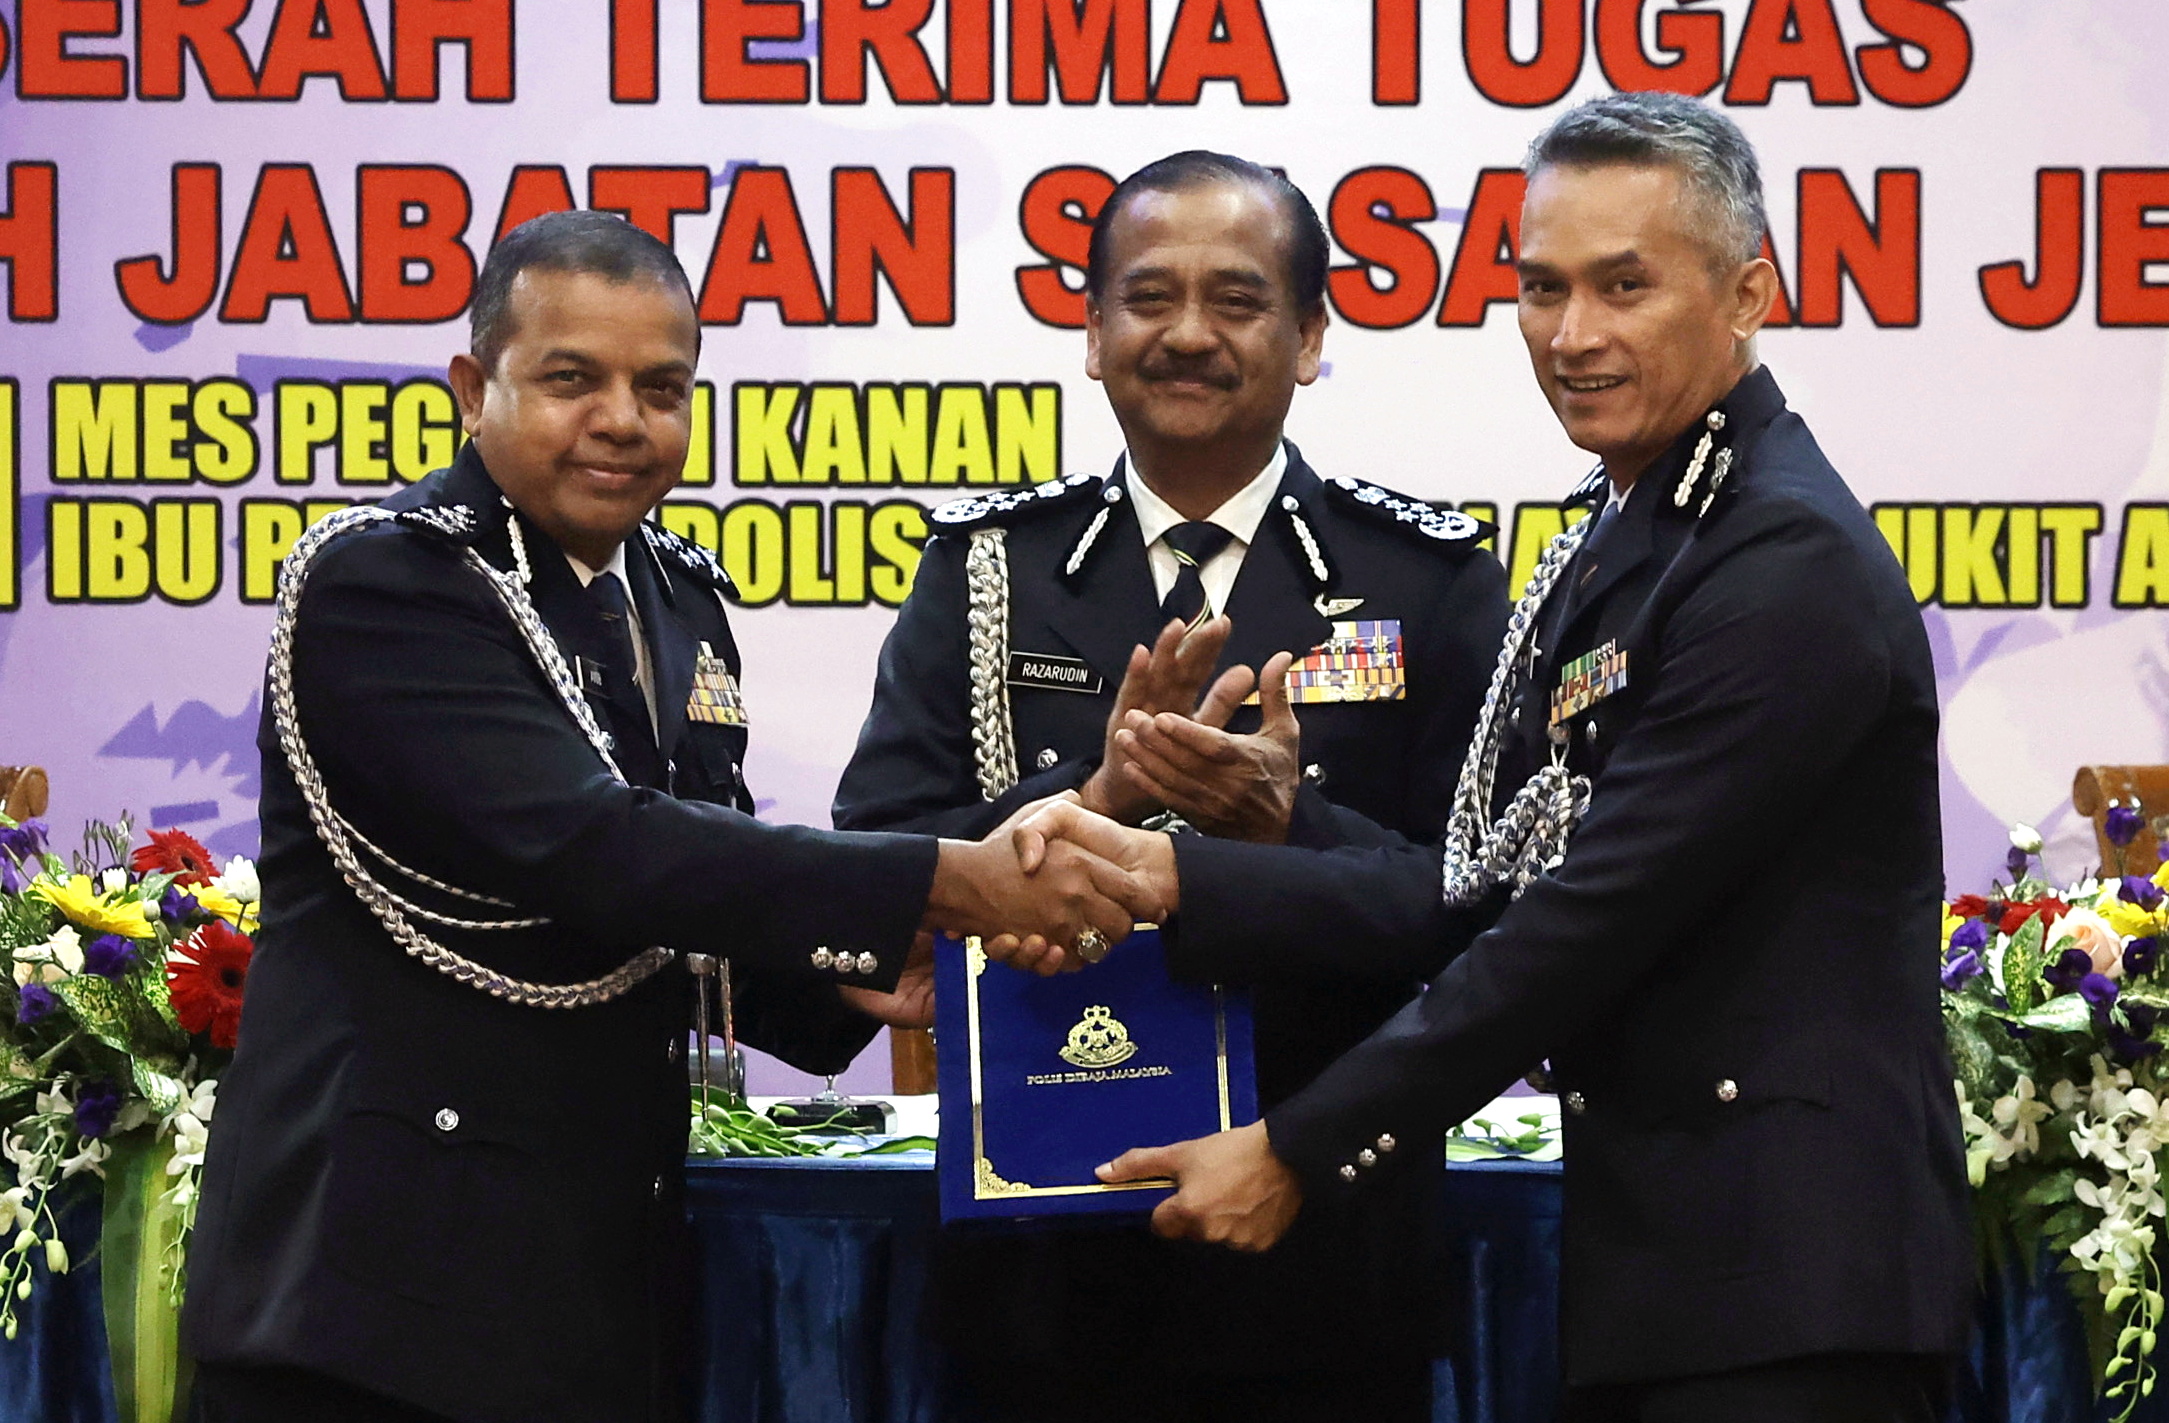 Shuhaily best candidate for CID director because of experience, track record: IGP